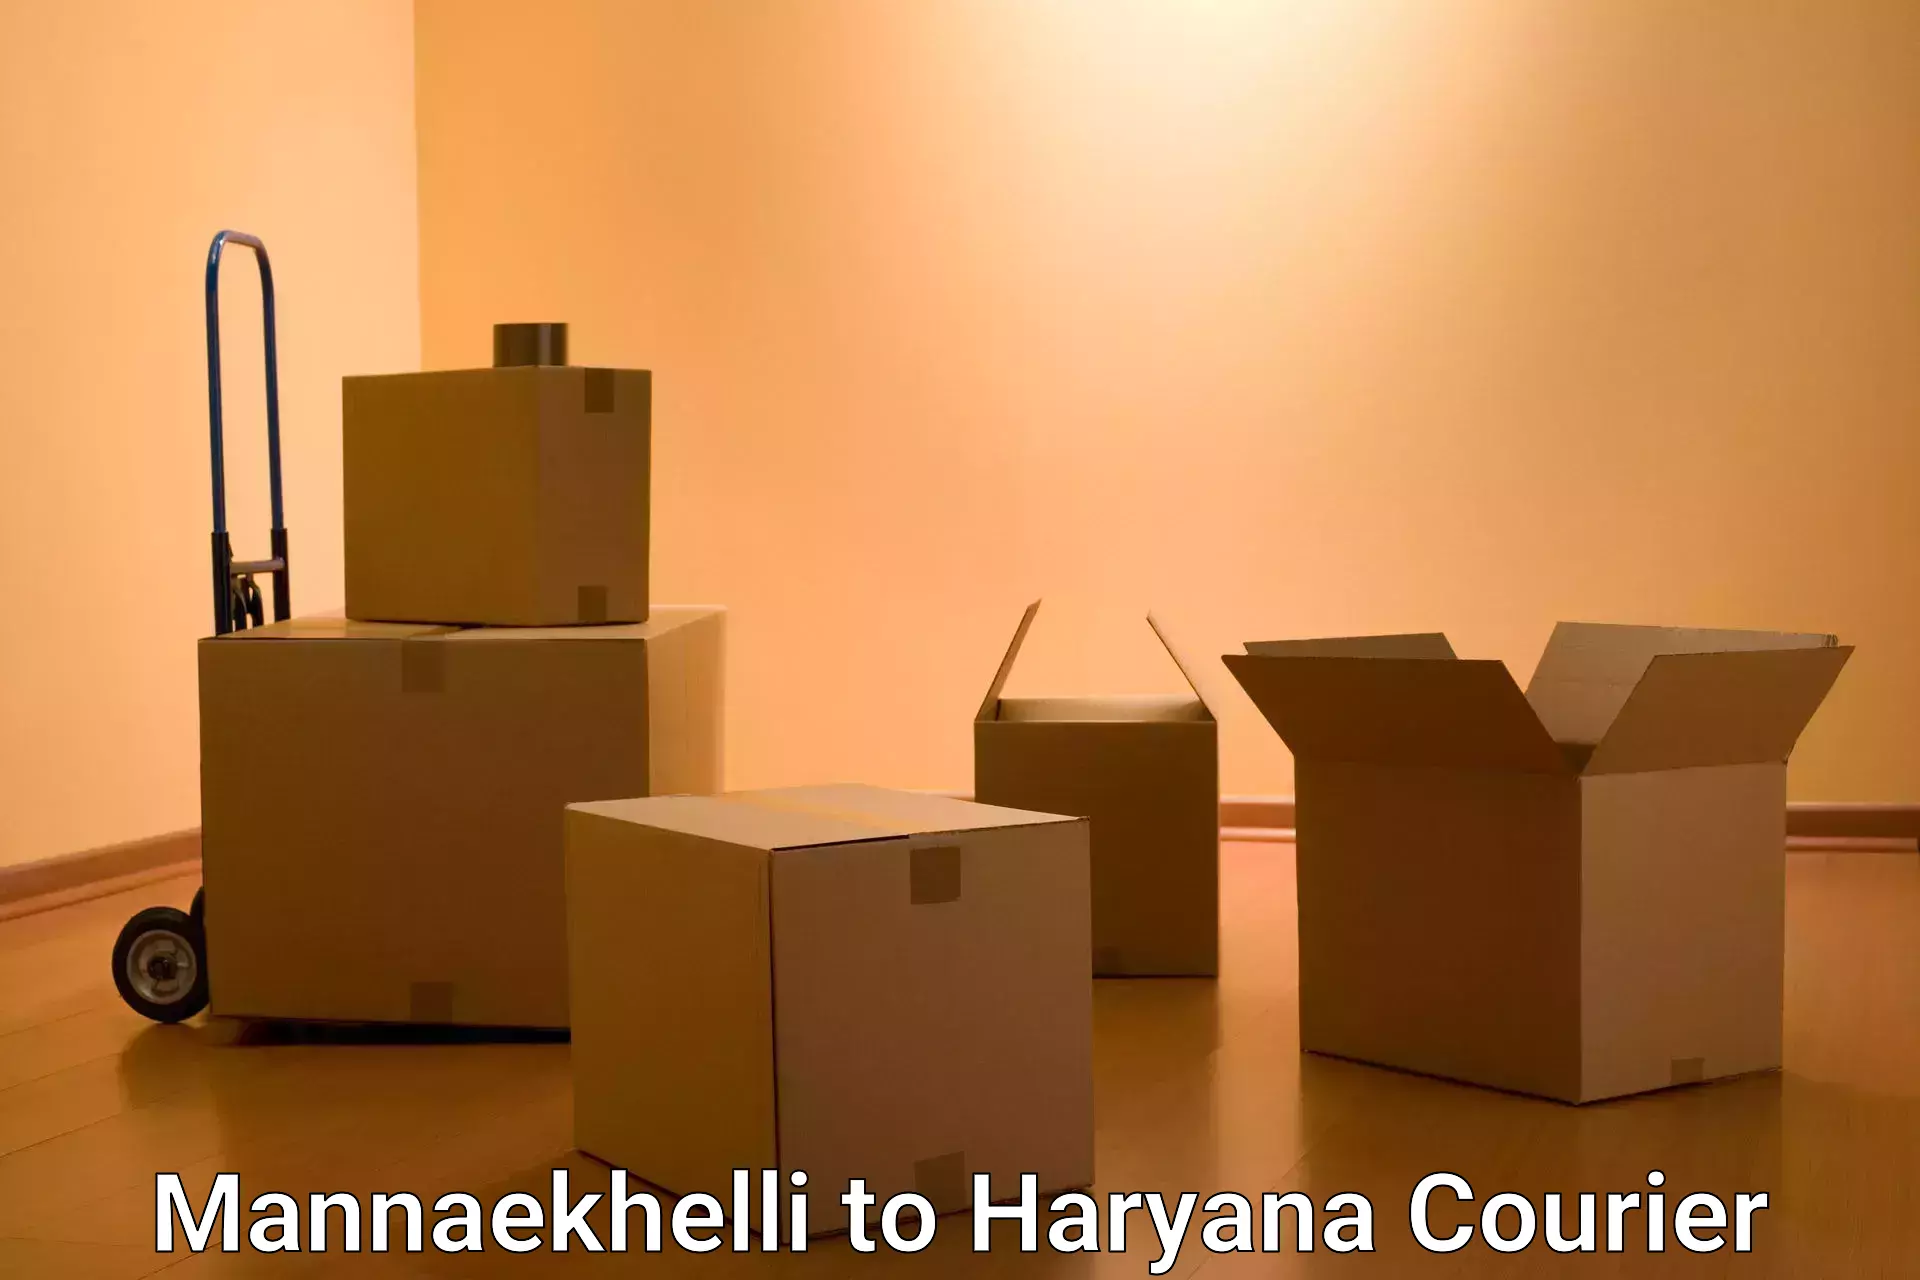 Personal parcel delivery in Mannaekhelli to NCR Haryana